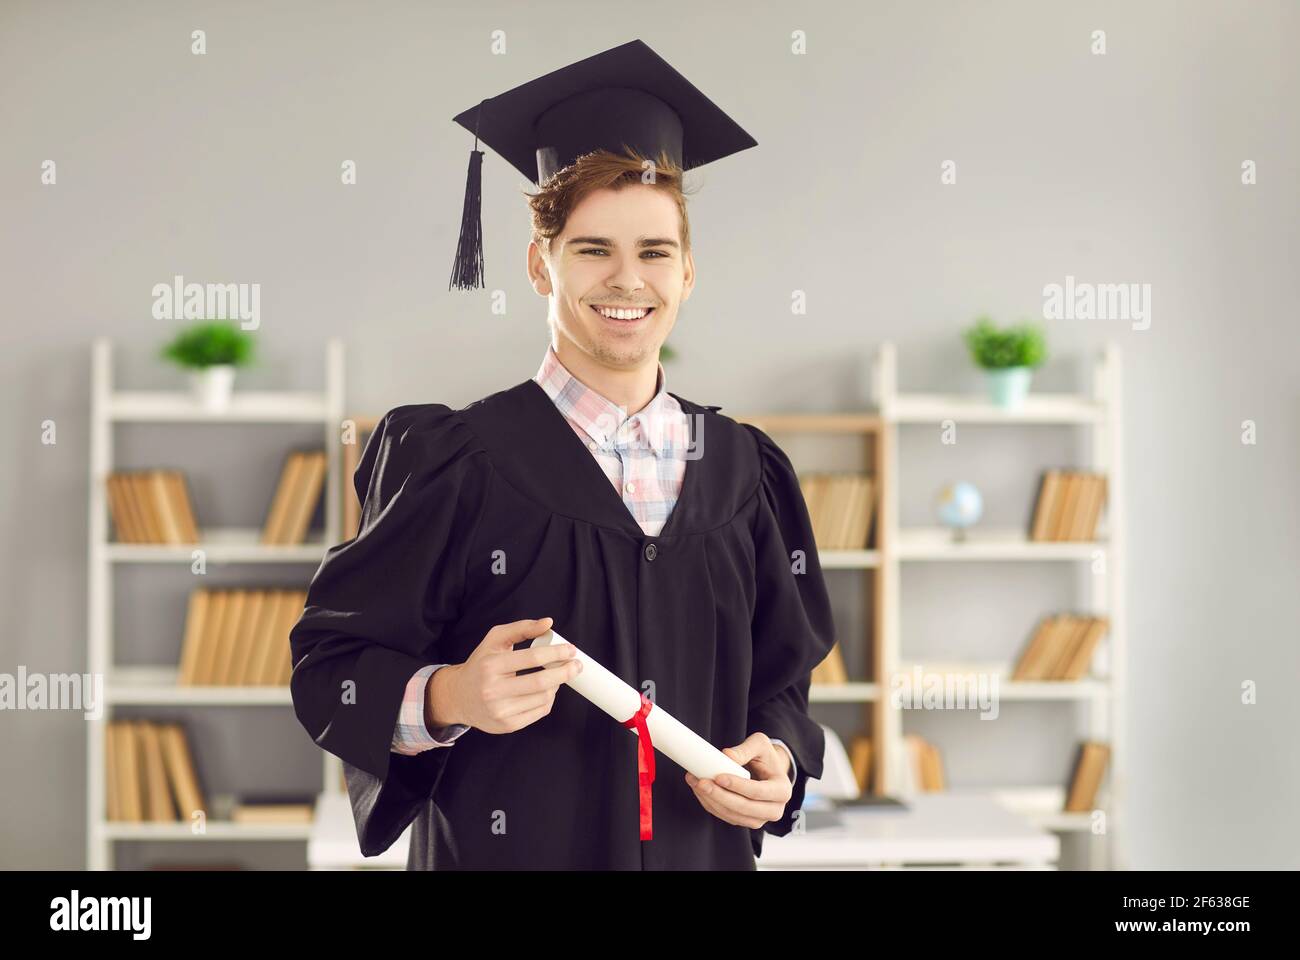 Graduate student in gown, hat with graduation certificate diploma portrait Stock Photo